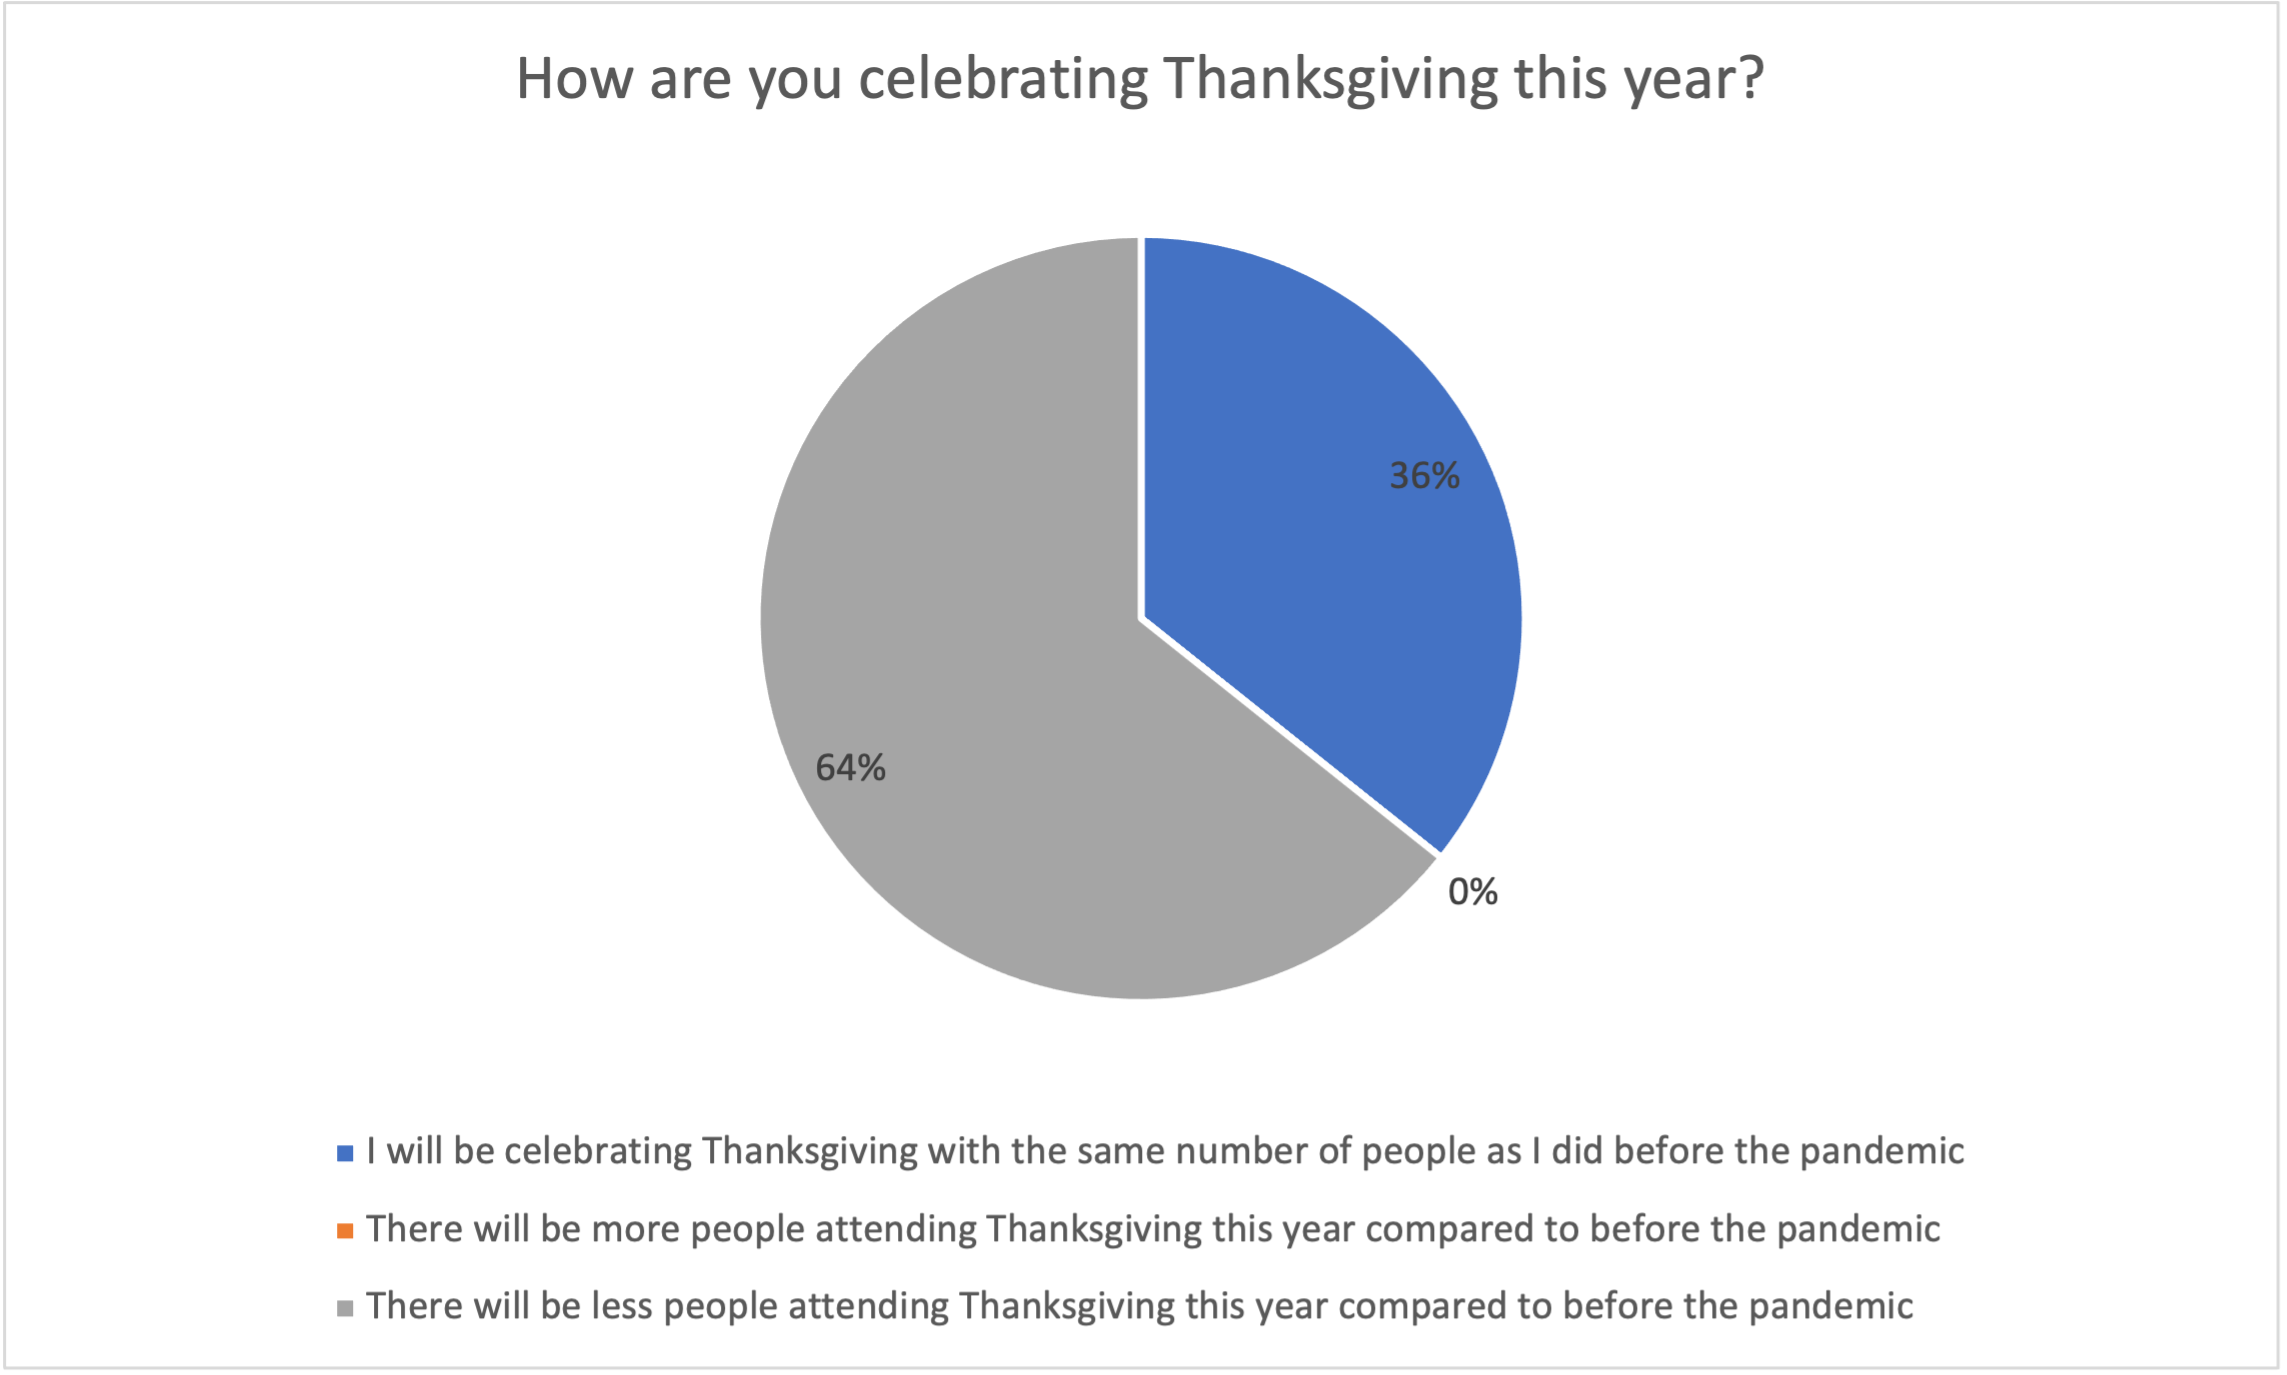 Poll results: How are you celebrating Thanksgiving this year?